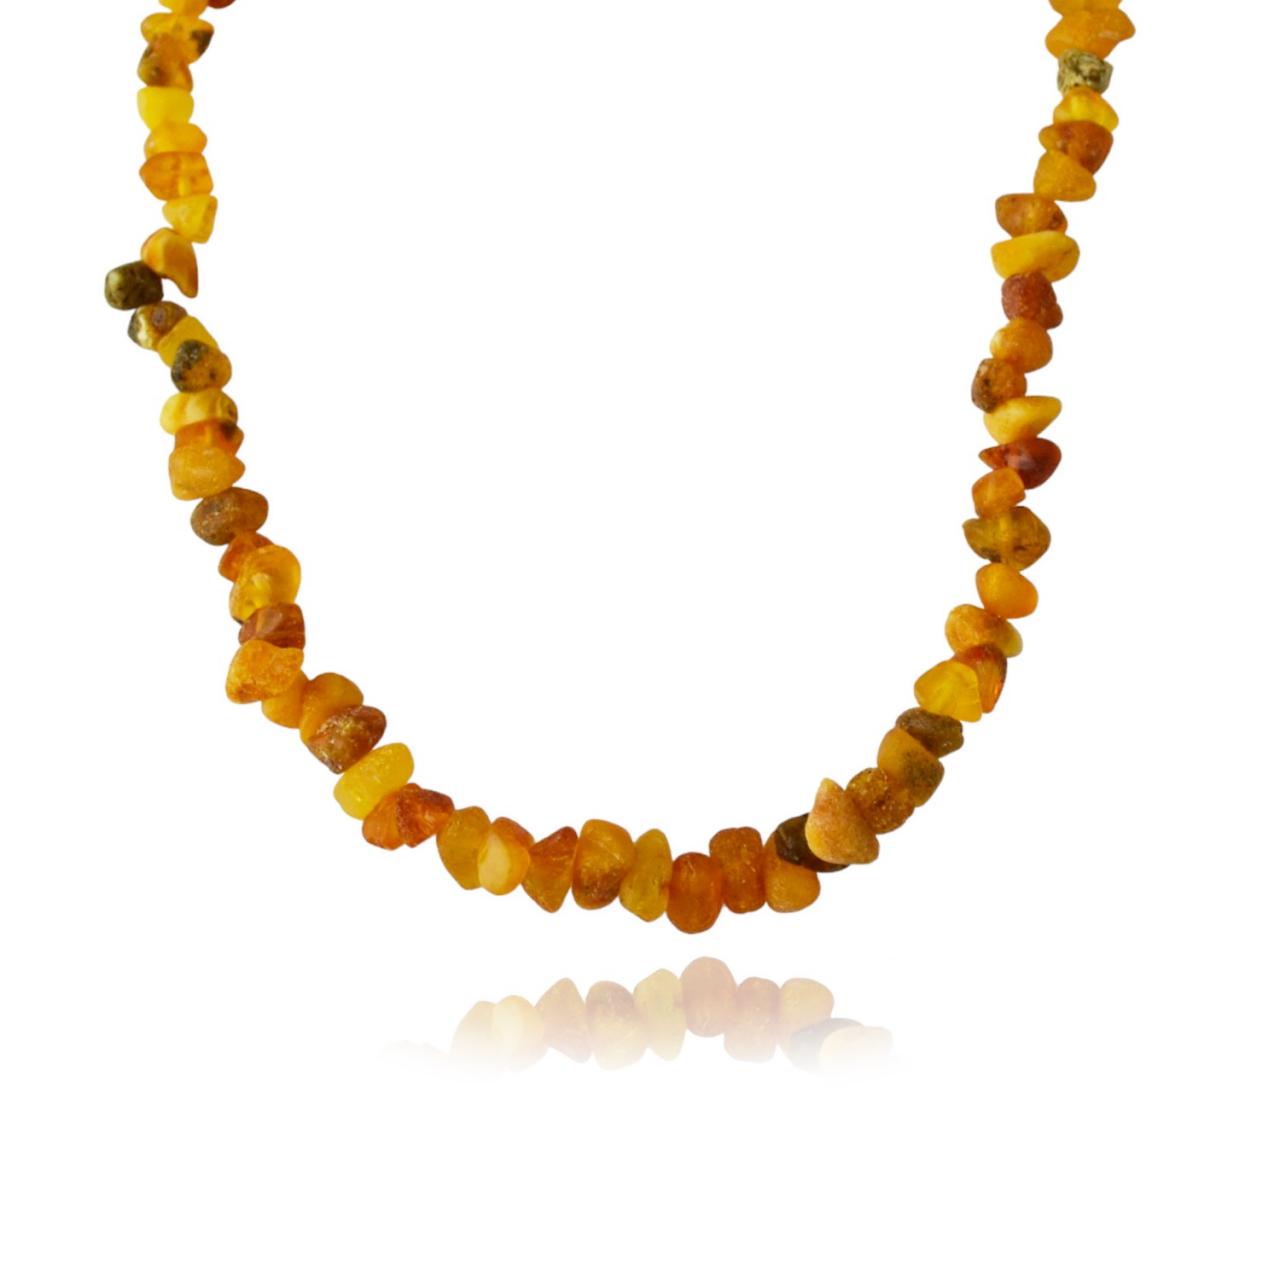 Raw Baltic Amber Necklace For Women 45 Cm Long, Special Birthday Gift Idea For Girls | Maritavita | Dm74